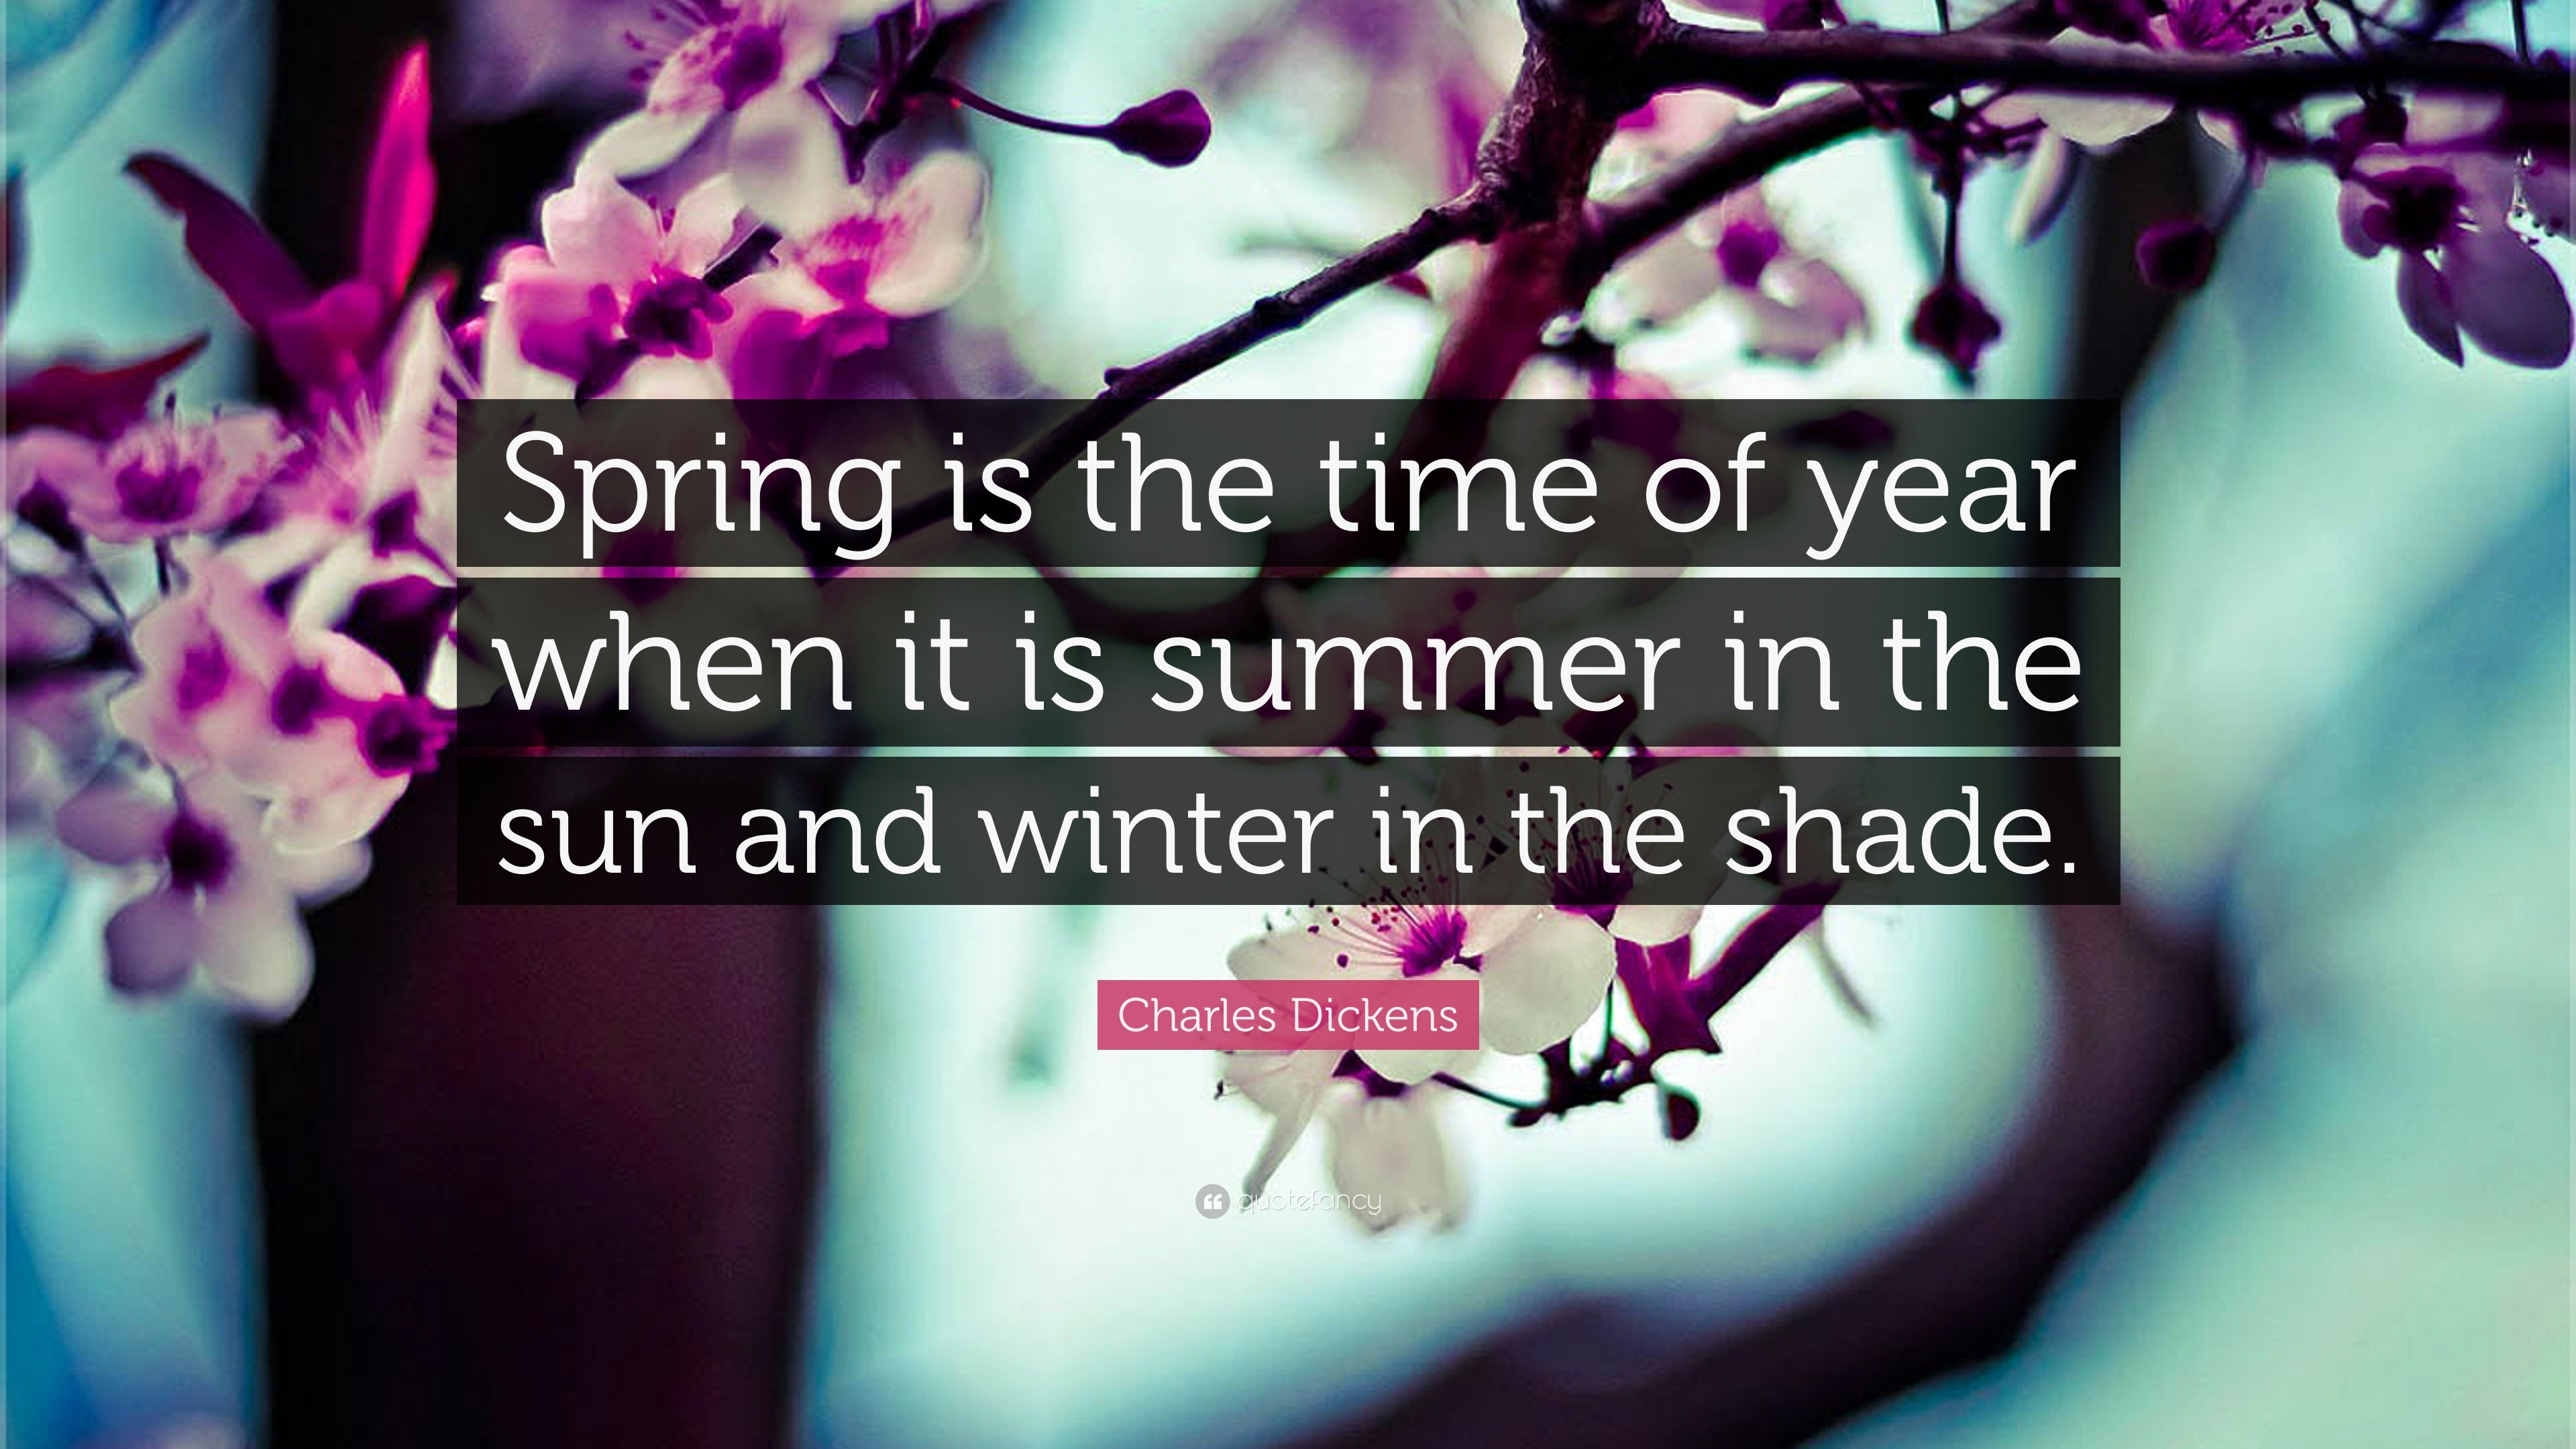 Charles Dickens Quote: “Spring is the time of year when it is summer in the  sun